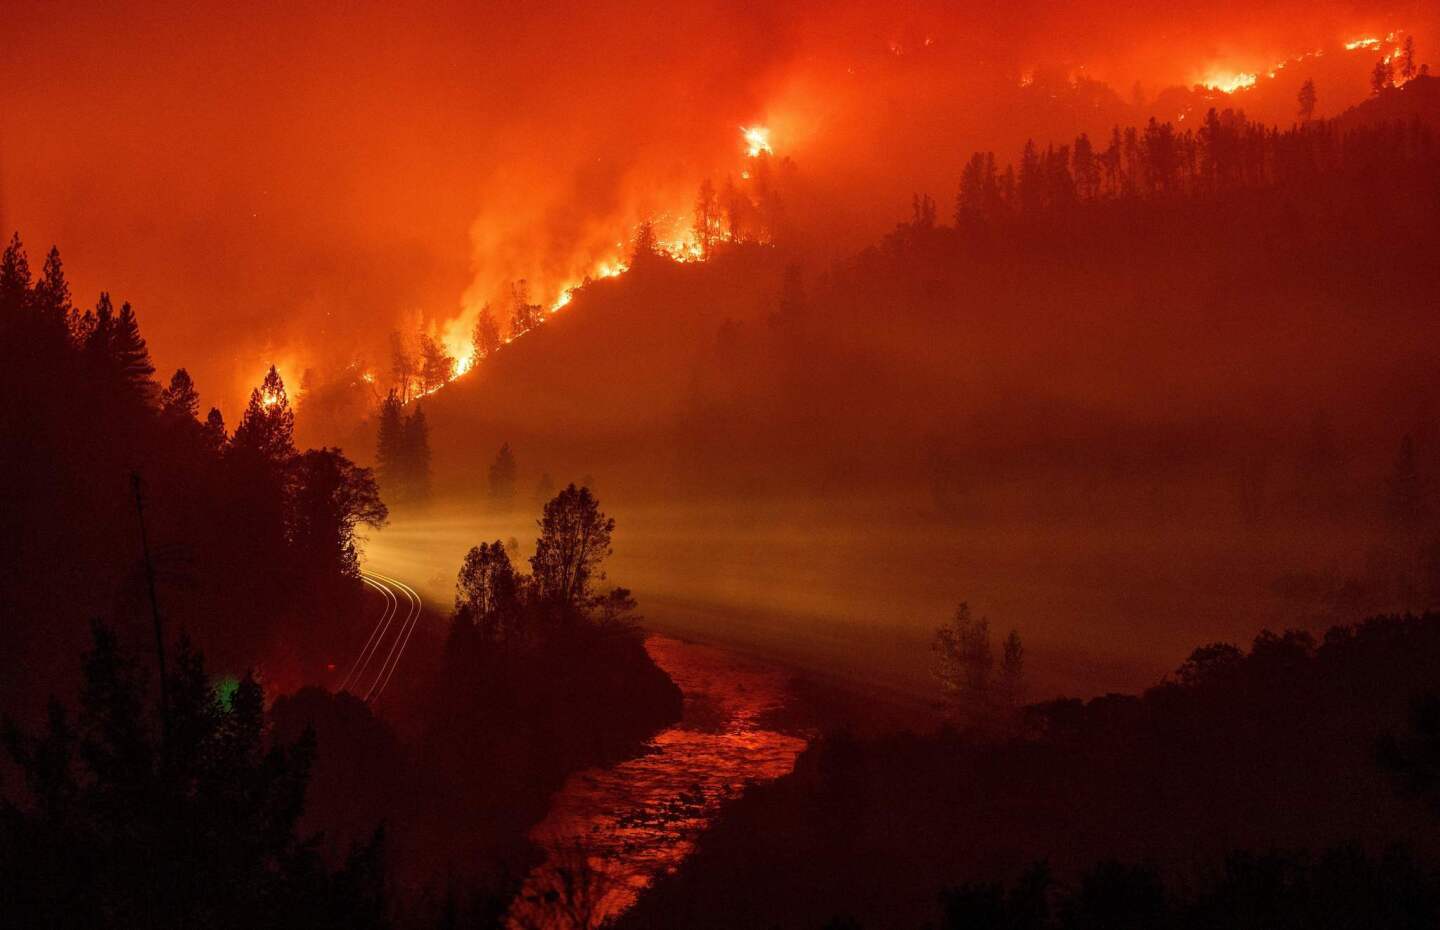 Light from a train is seen as it rounds a bend near the Sacramento River as flames from the Delta fire fill a valley in Delta.